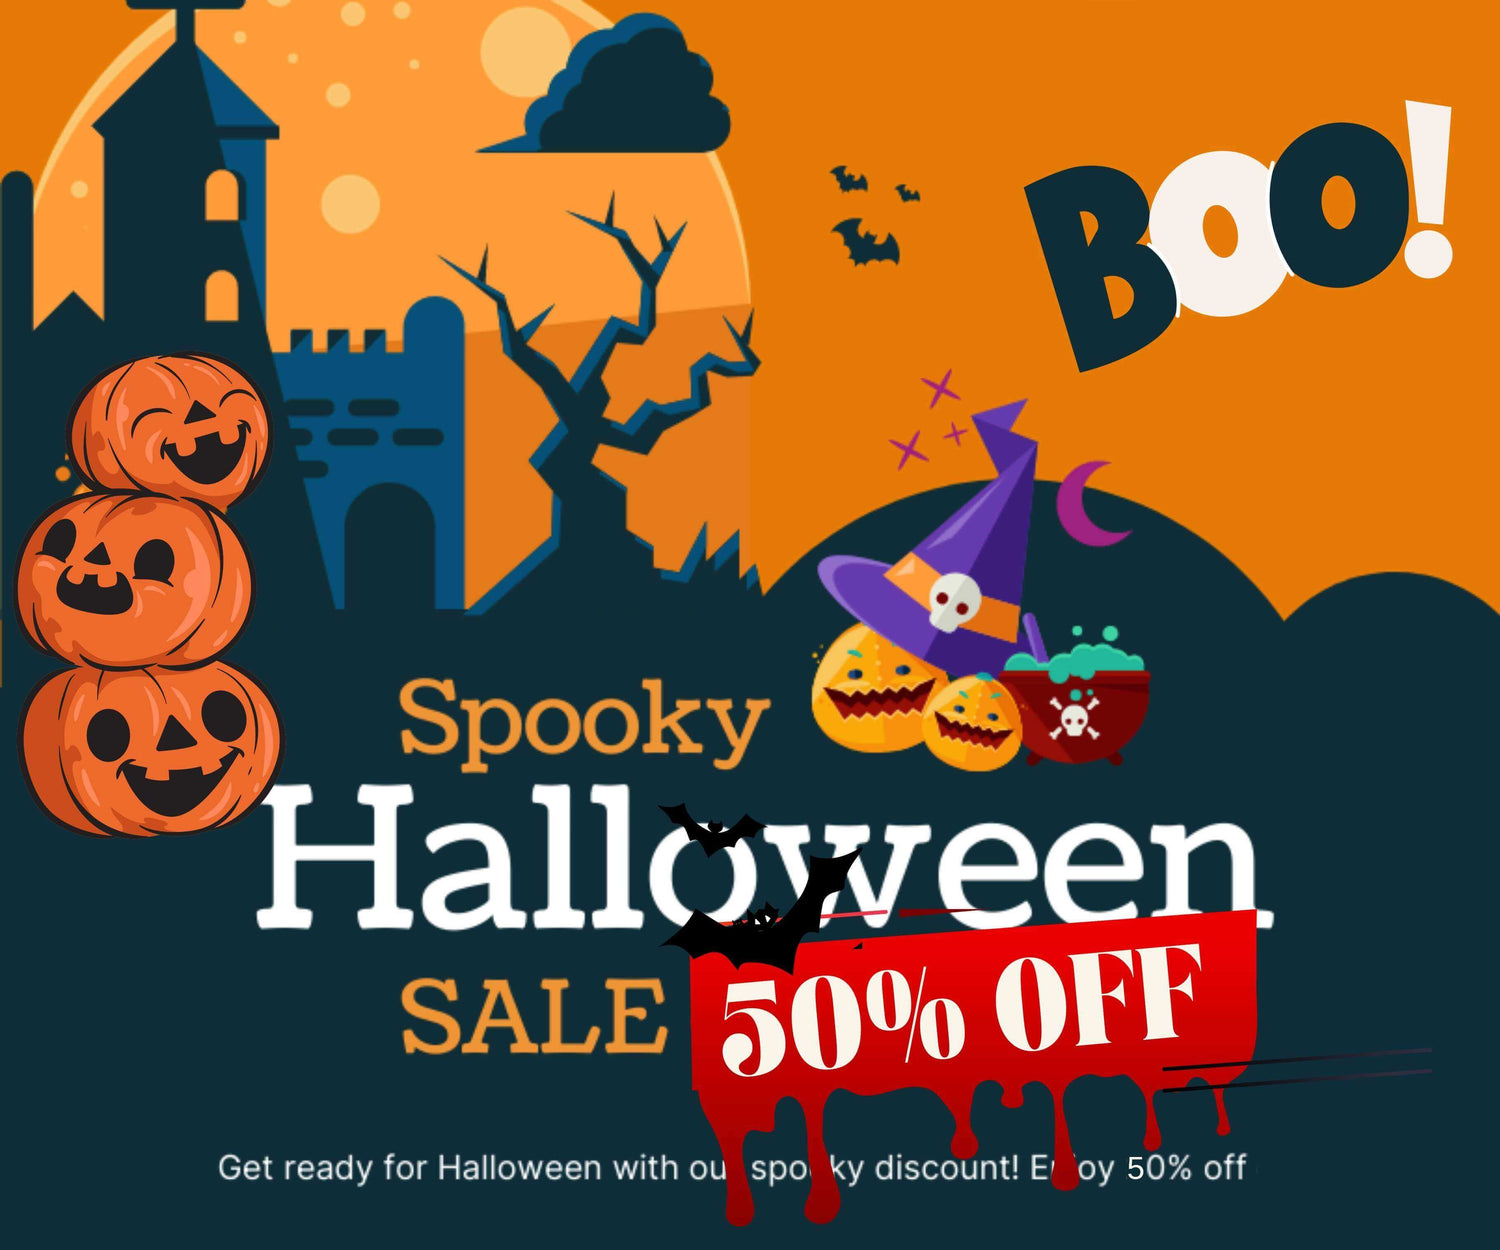 Halloween offer, 50% off on all skincare products